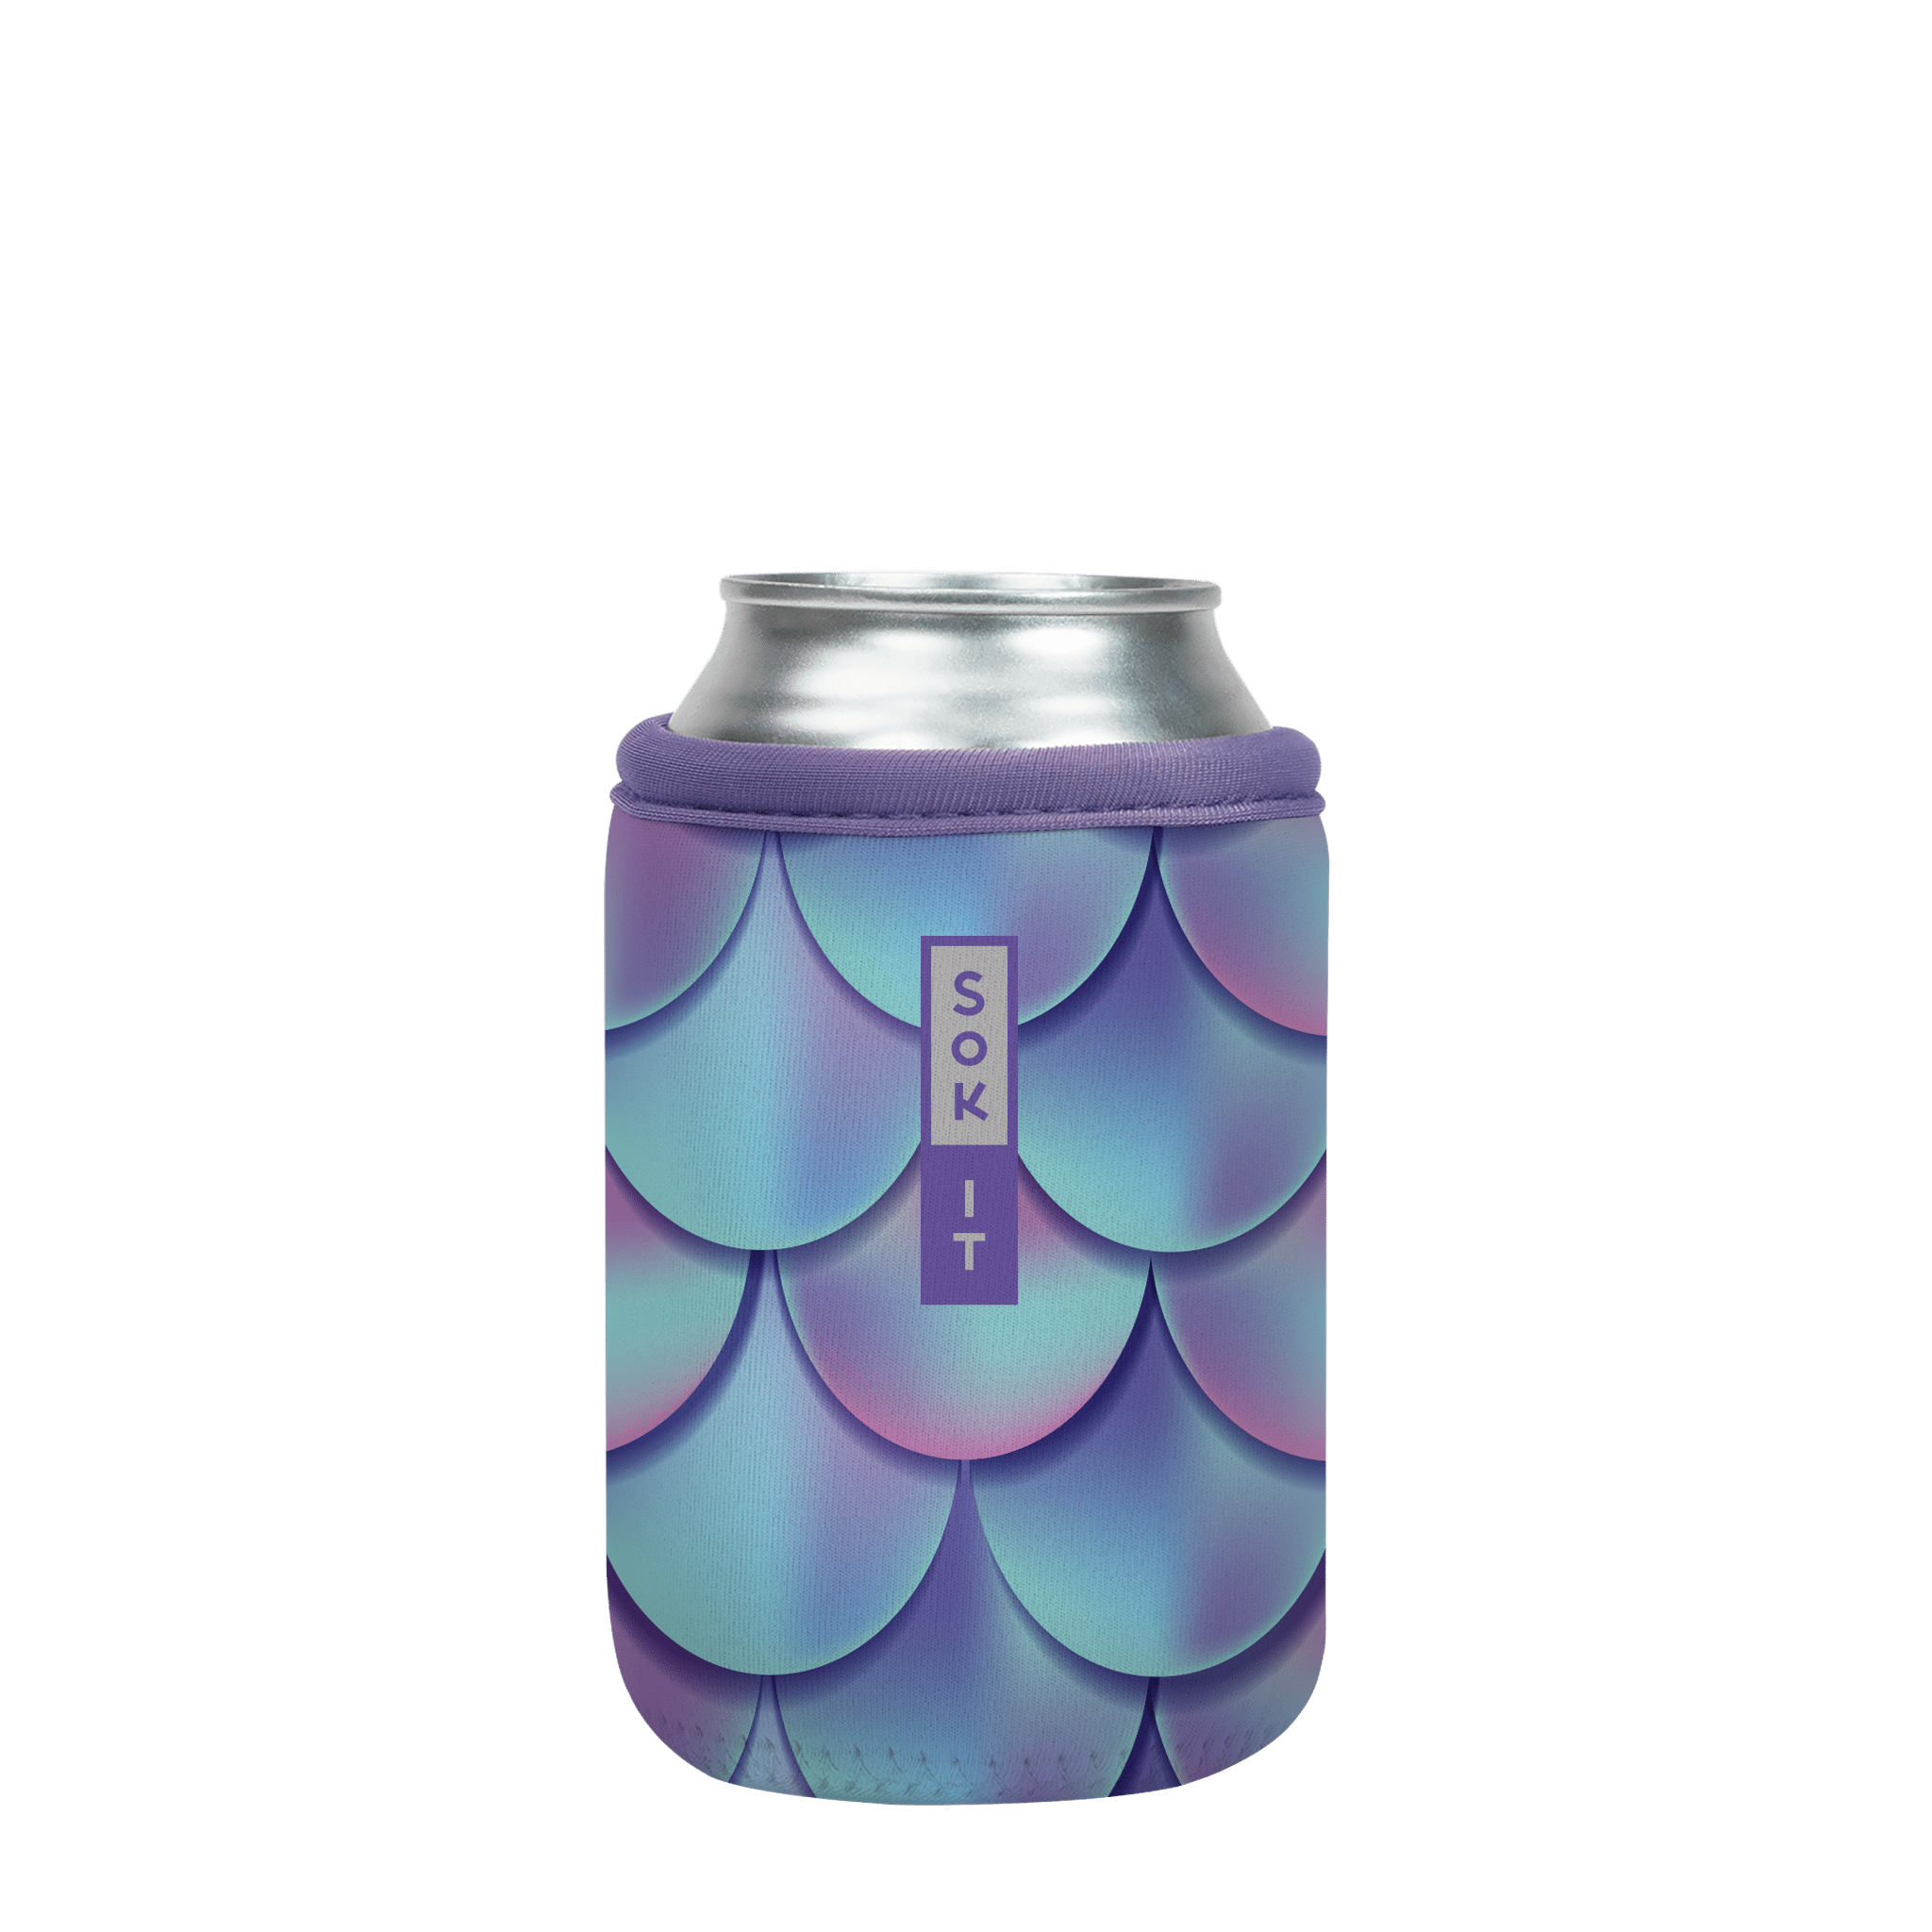 CanSok Mermaid Scales 12oz Can